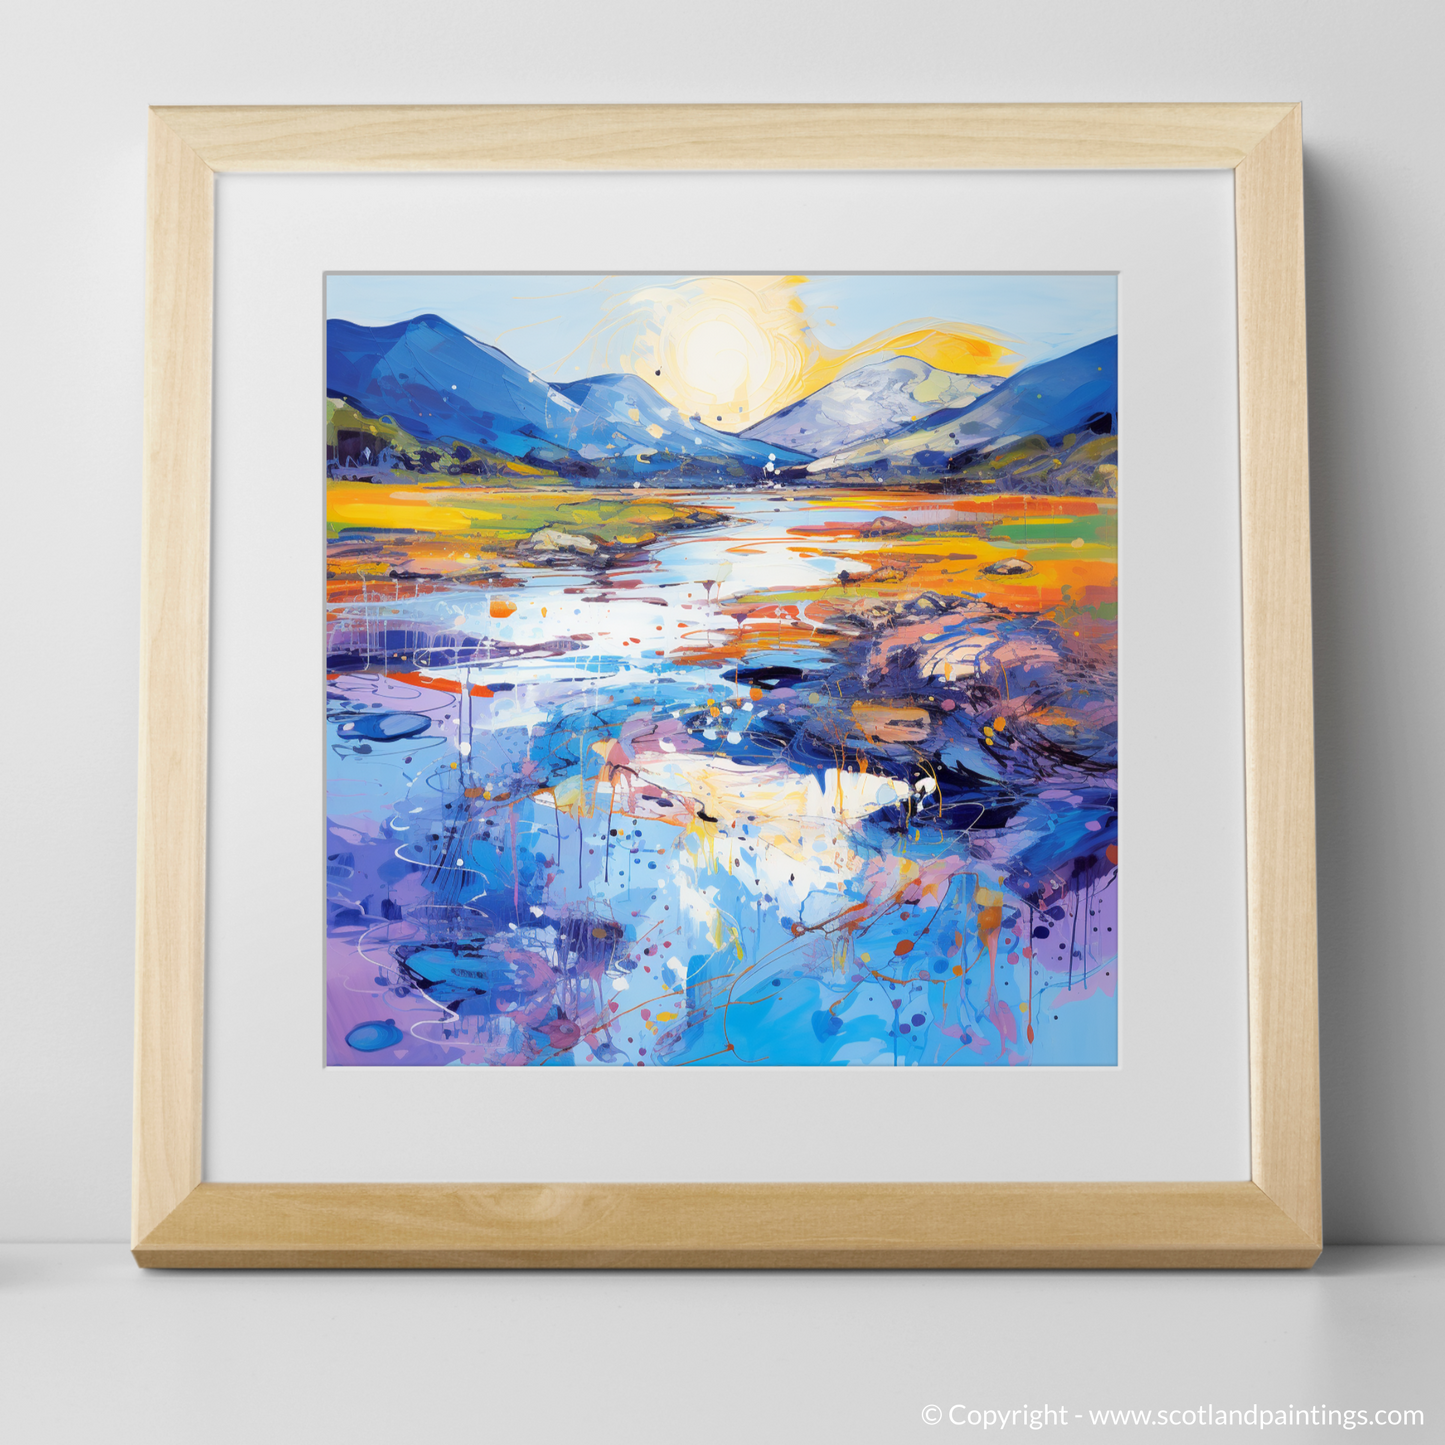 Art Print of River Etive, Argyll and Bute in summer with a natural frame